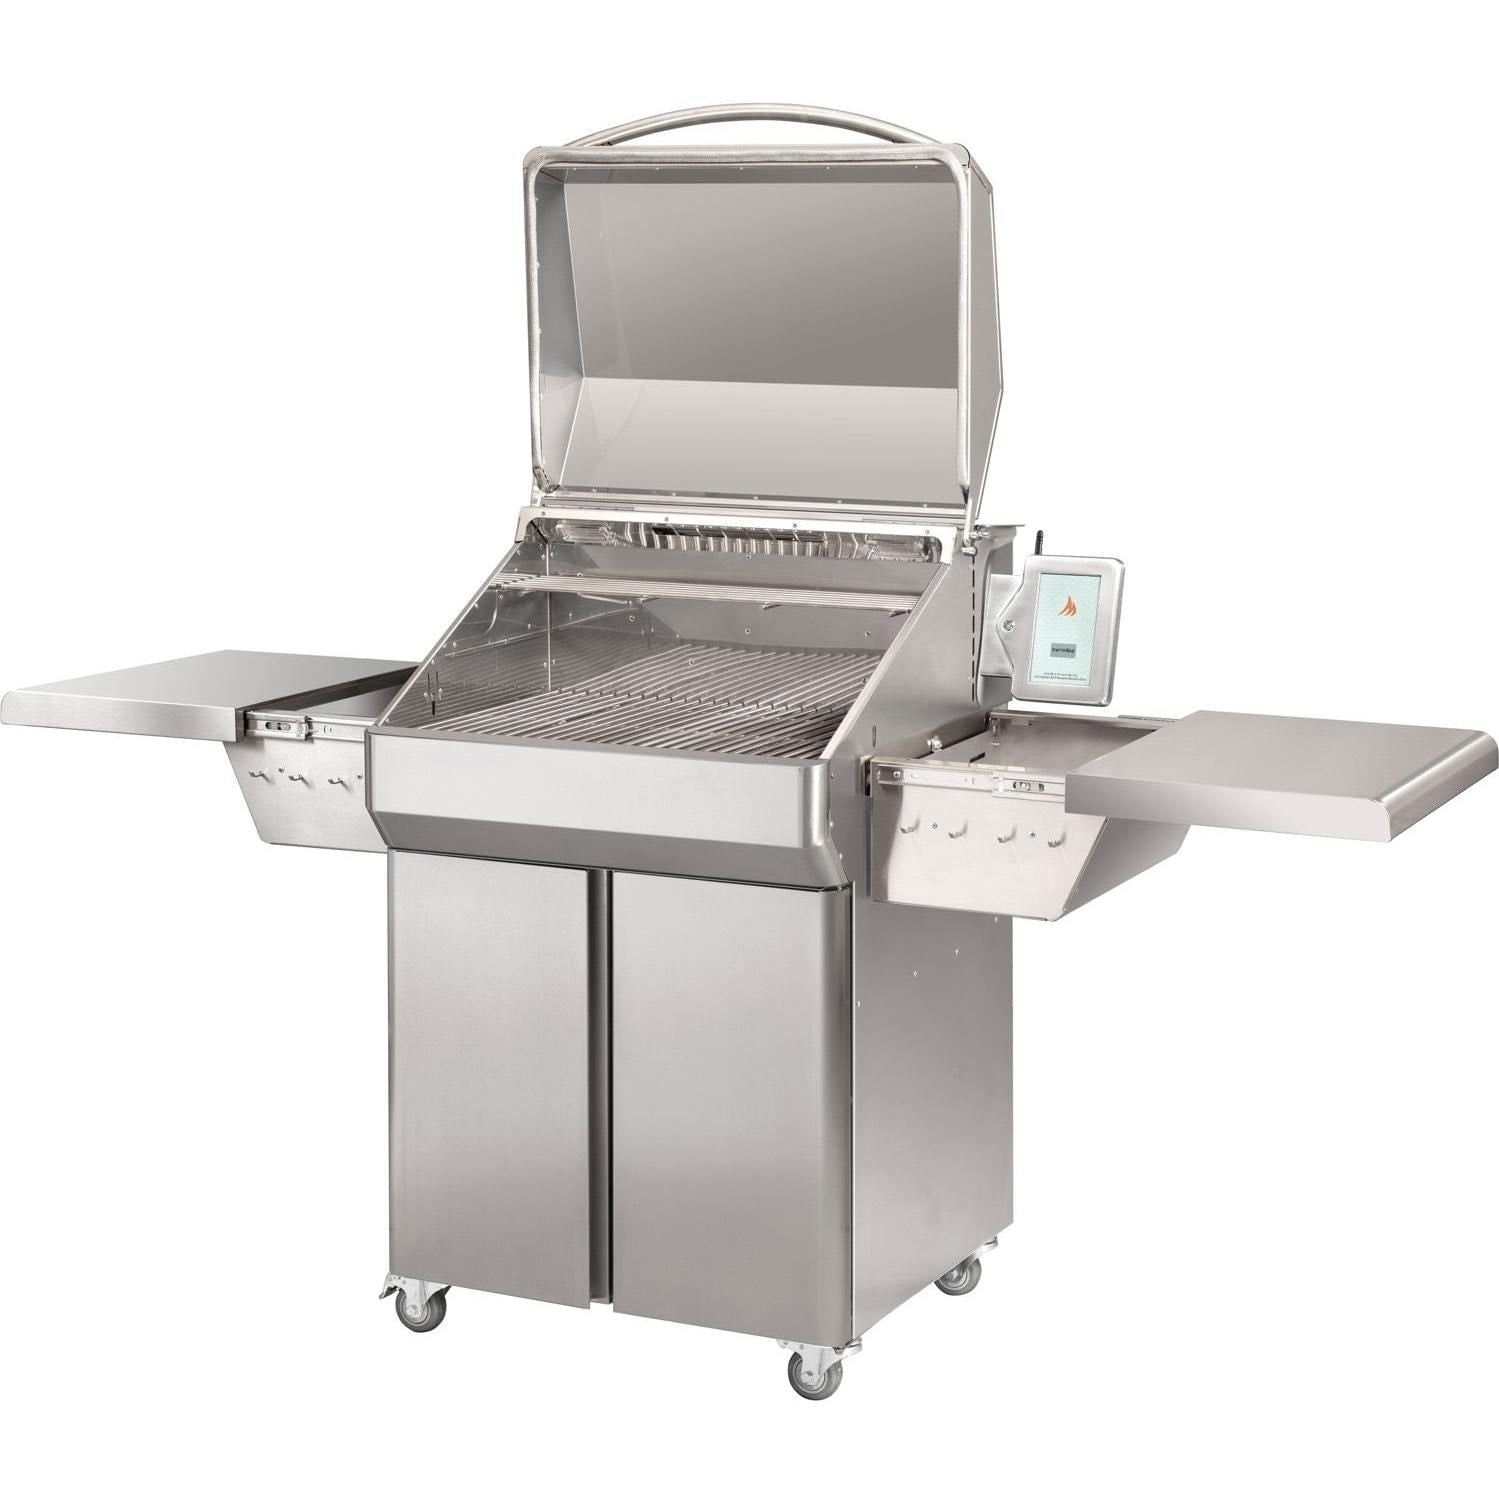 Memphis Grills Pro ITC3 Wi-Fi Monitored 28-Inch 304 Stainless Steel Pellet Grill - VG0001S